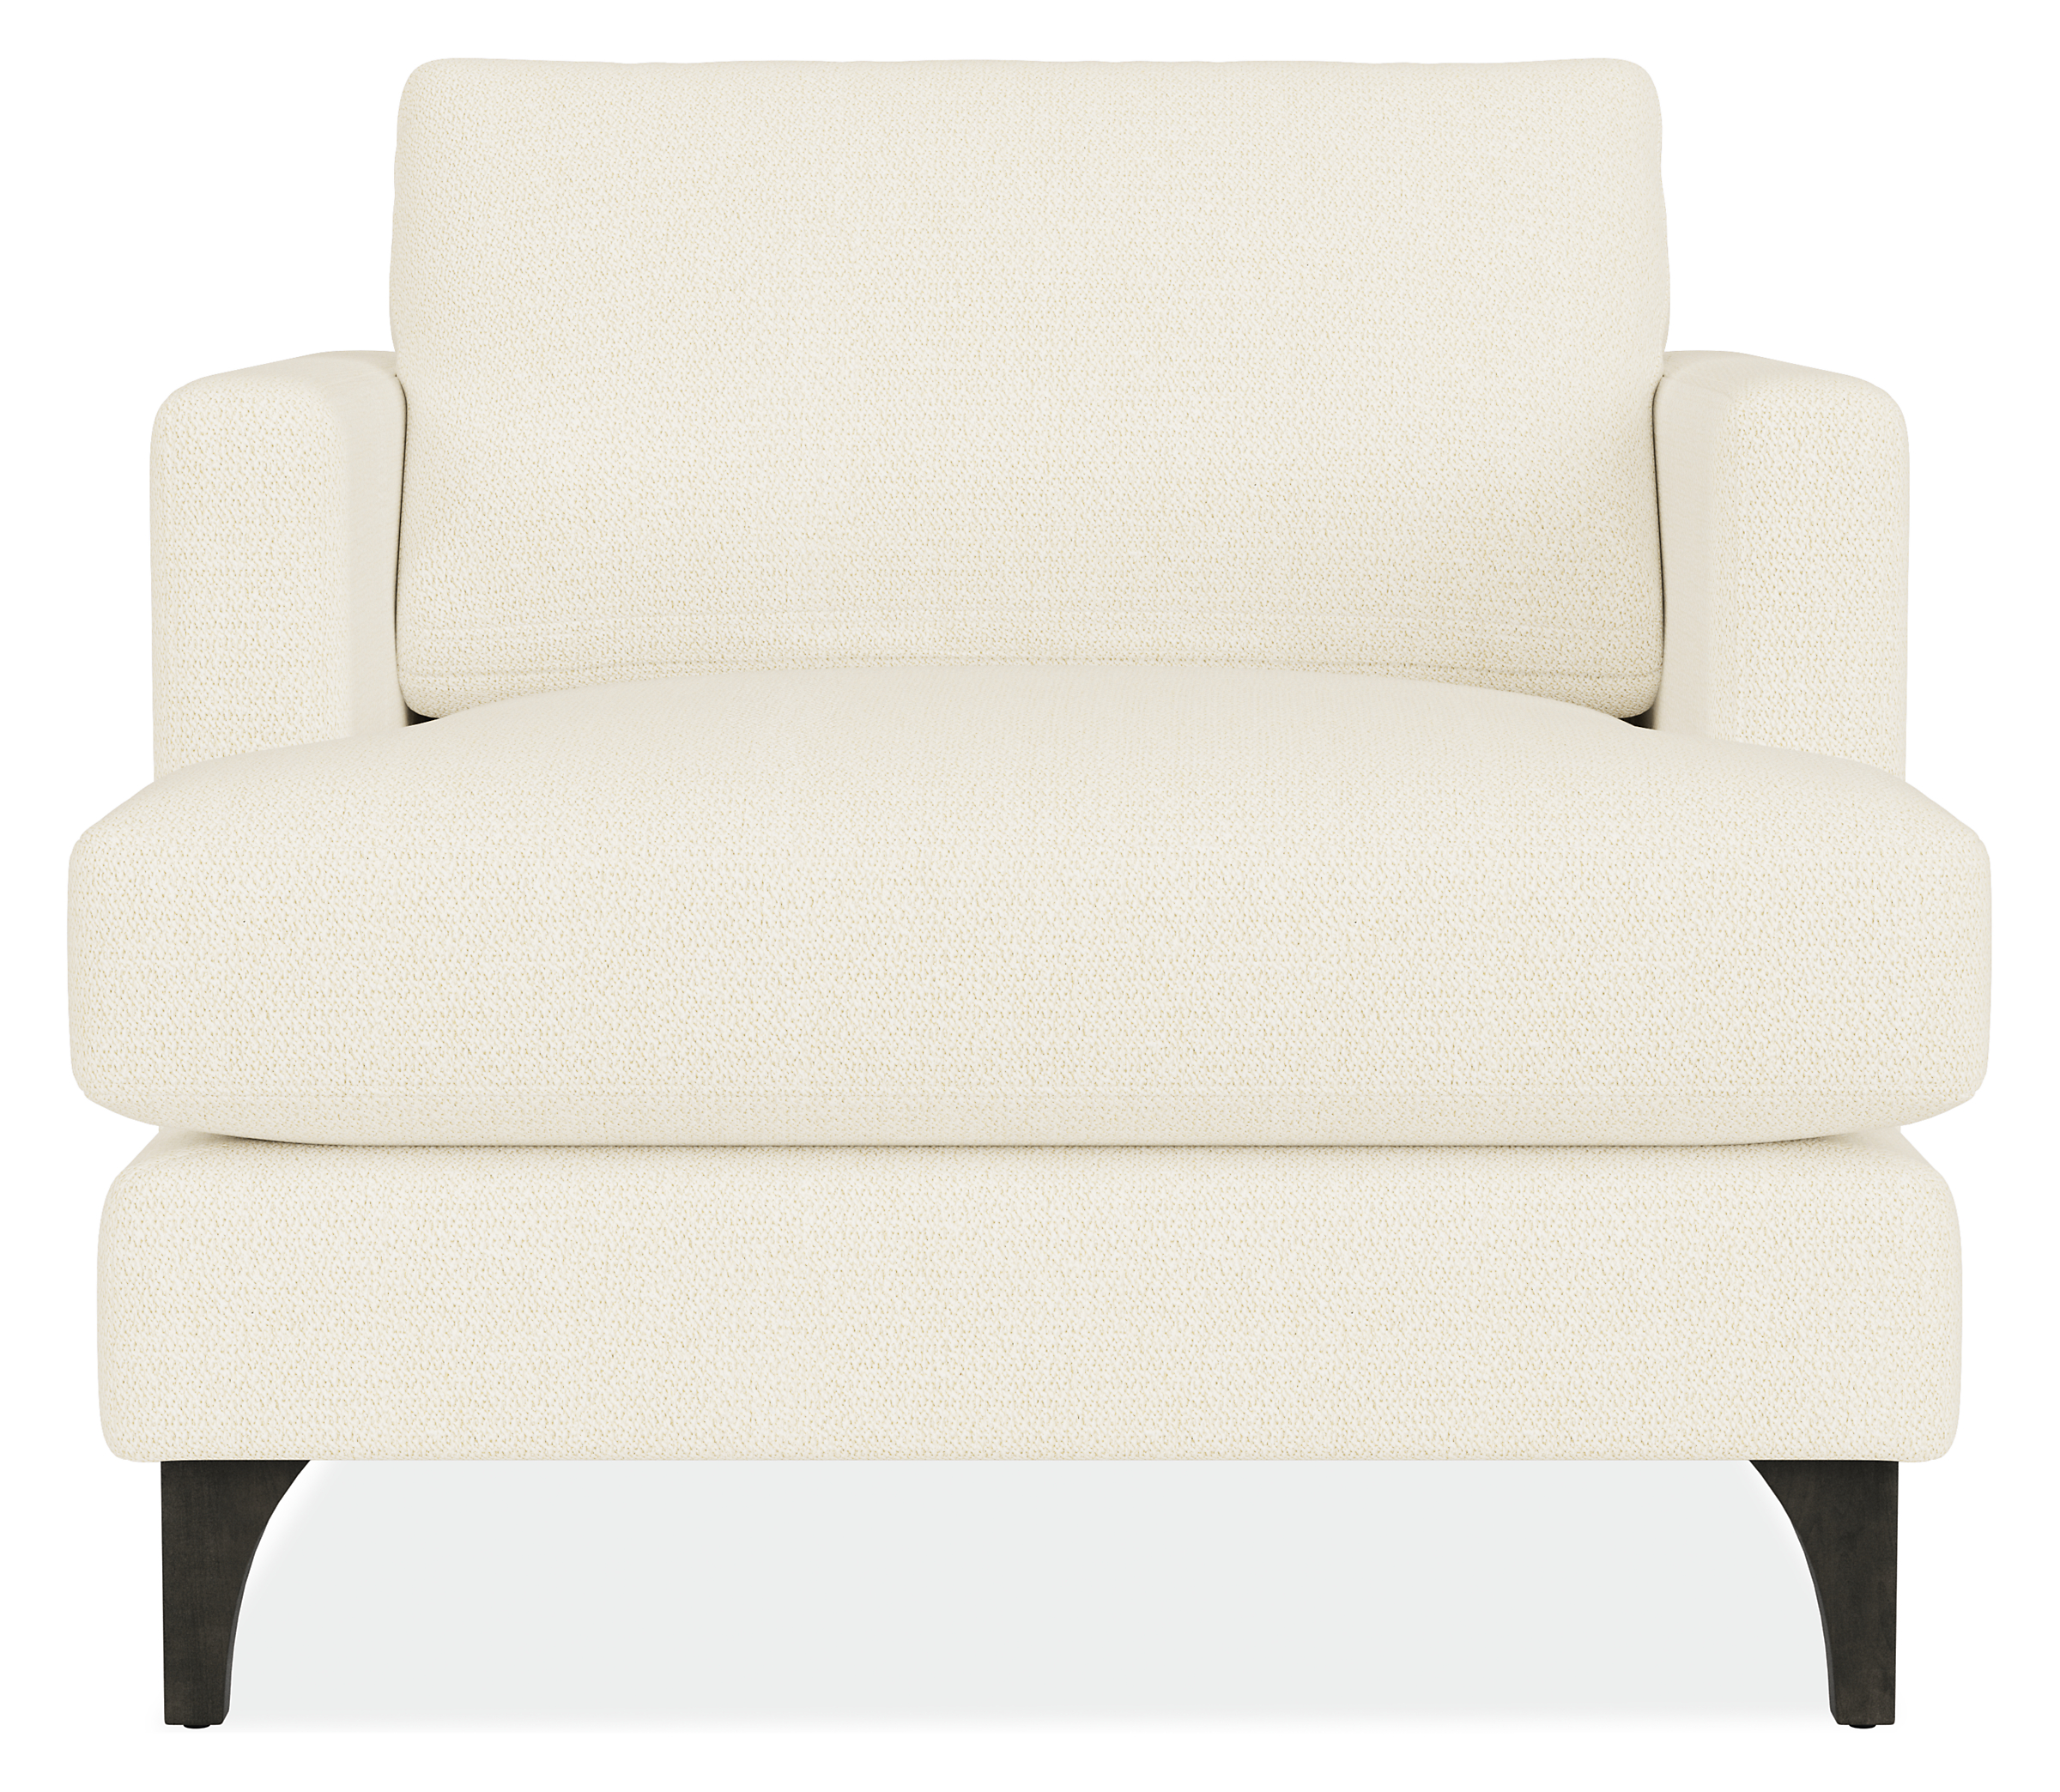 Front view of Carlton Chair in Orla White.